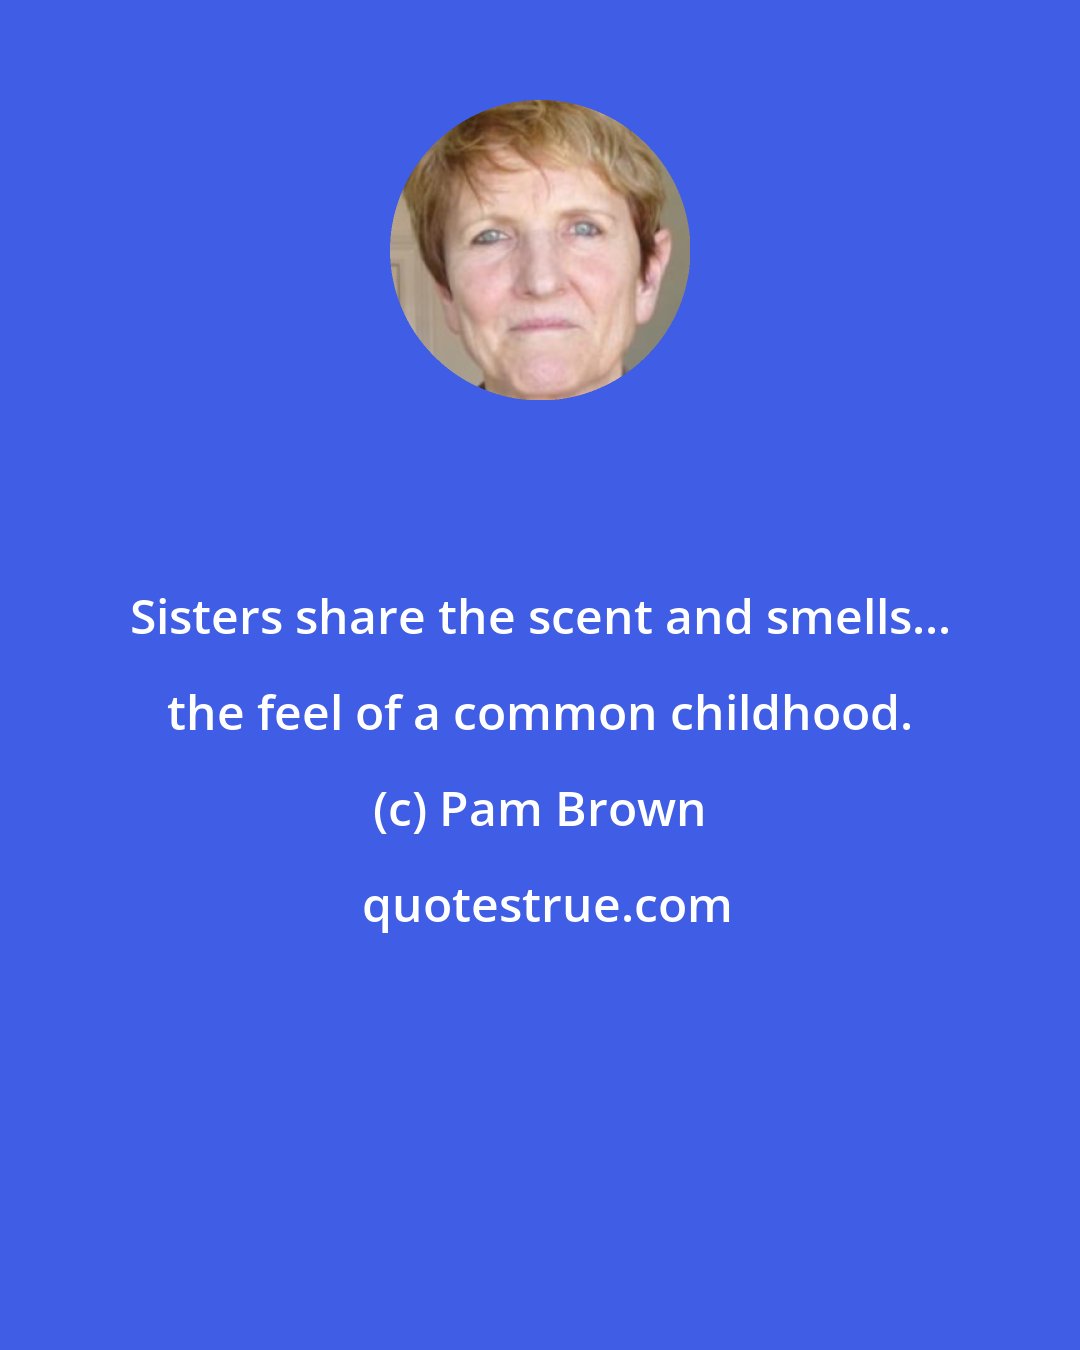 Pam Brown: Sisters share the scent and smells... the feel of a common childhood.